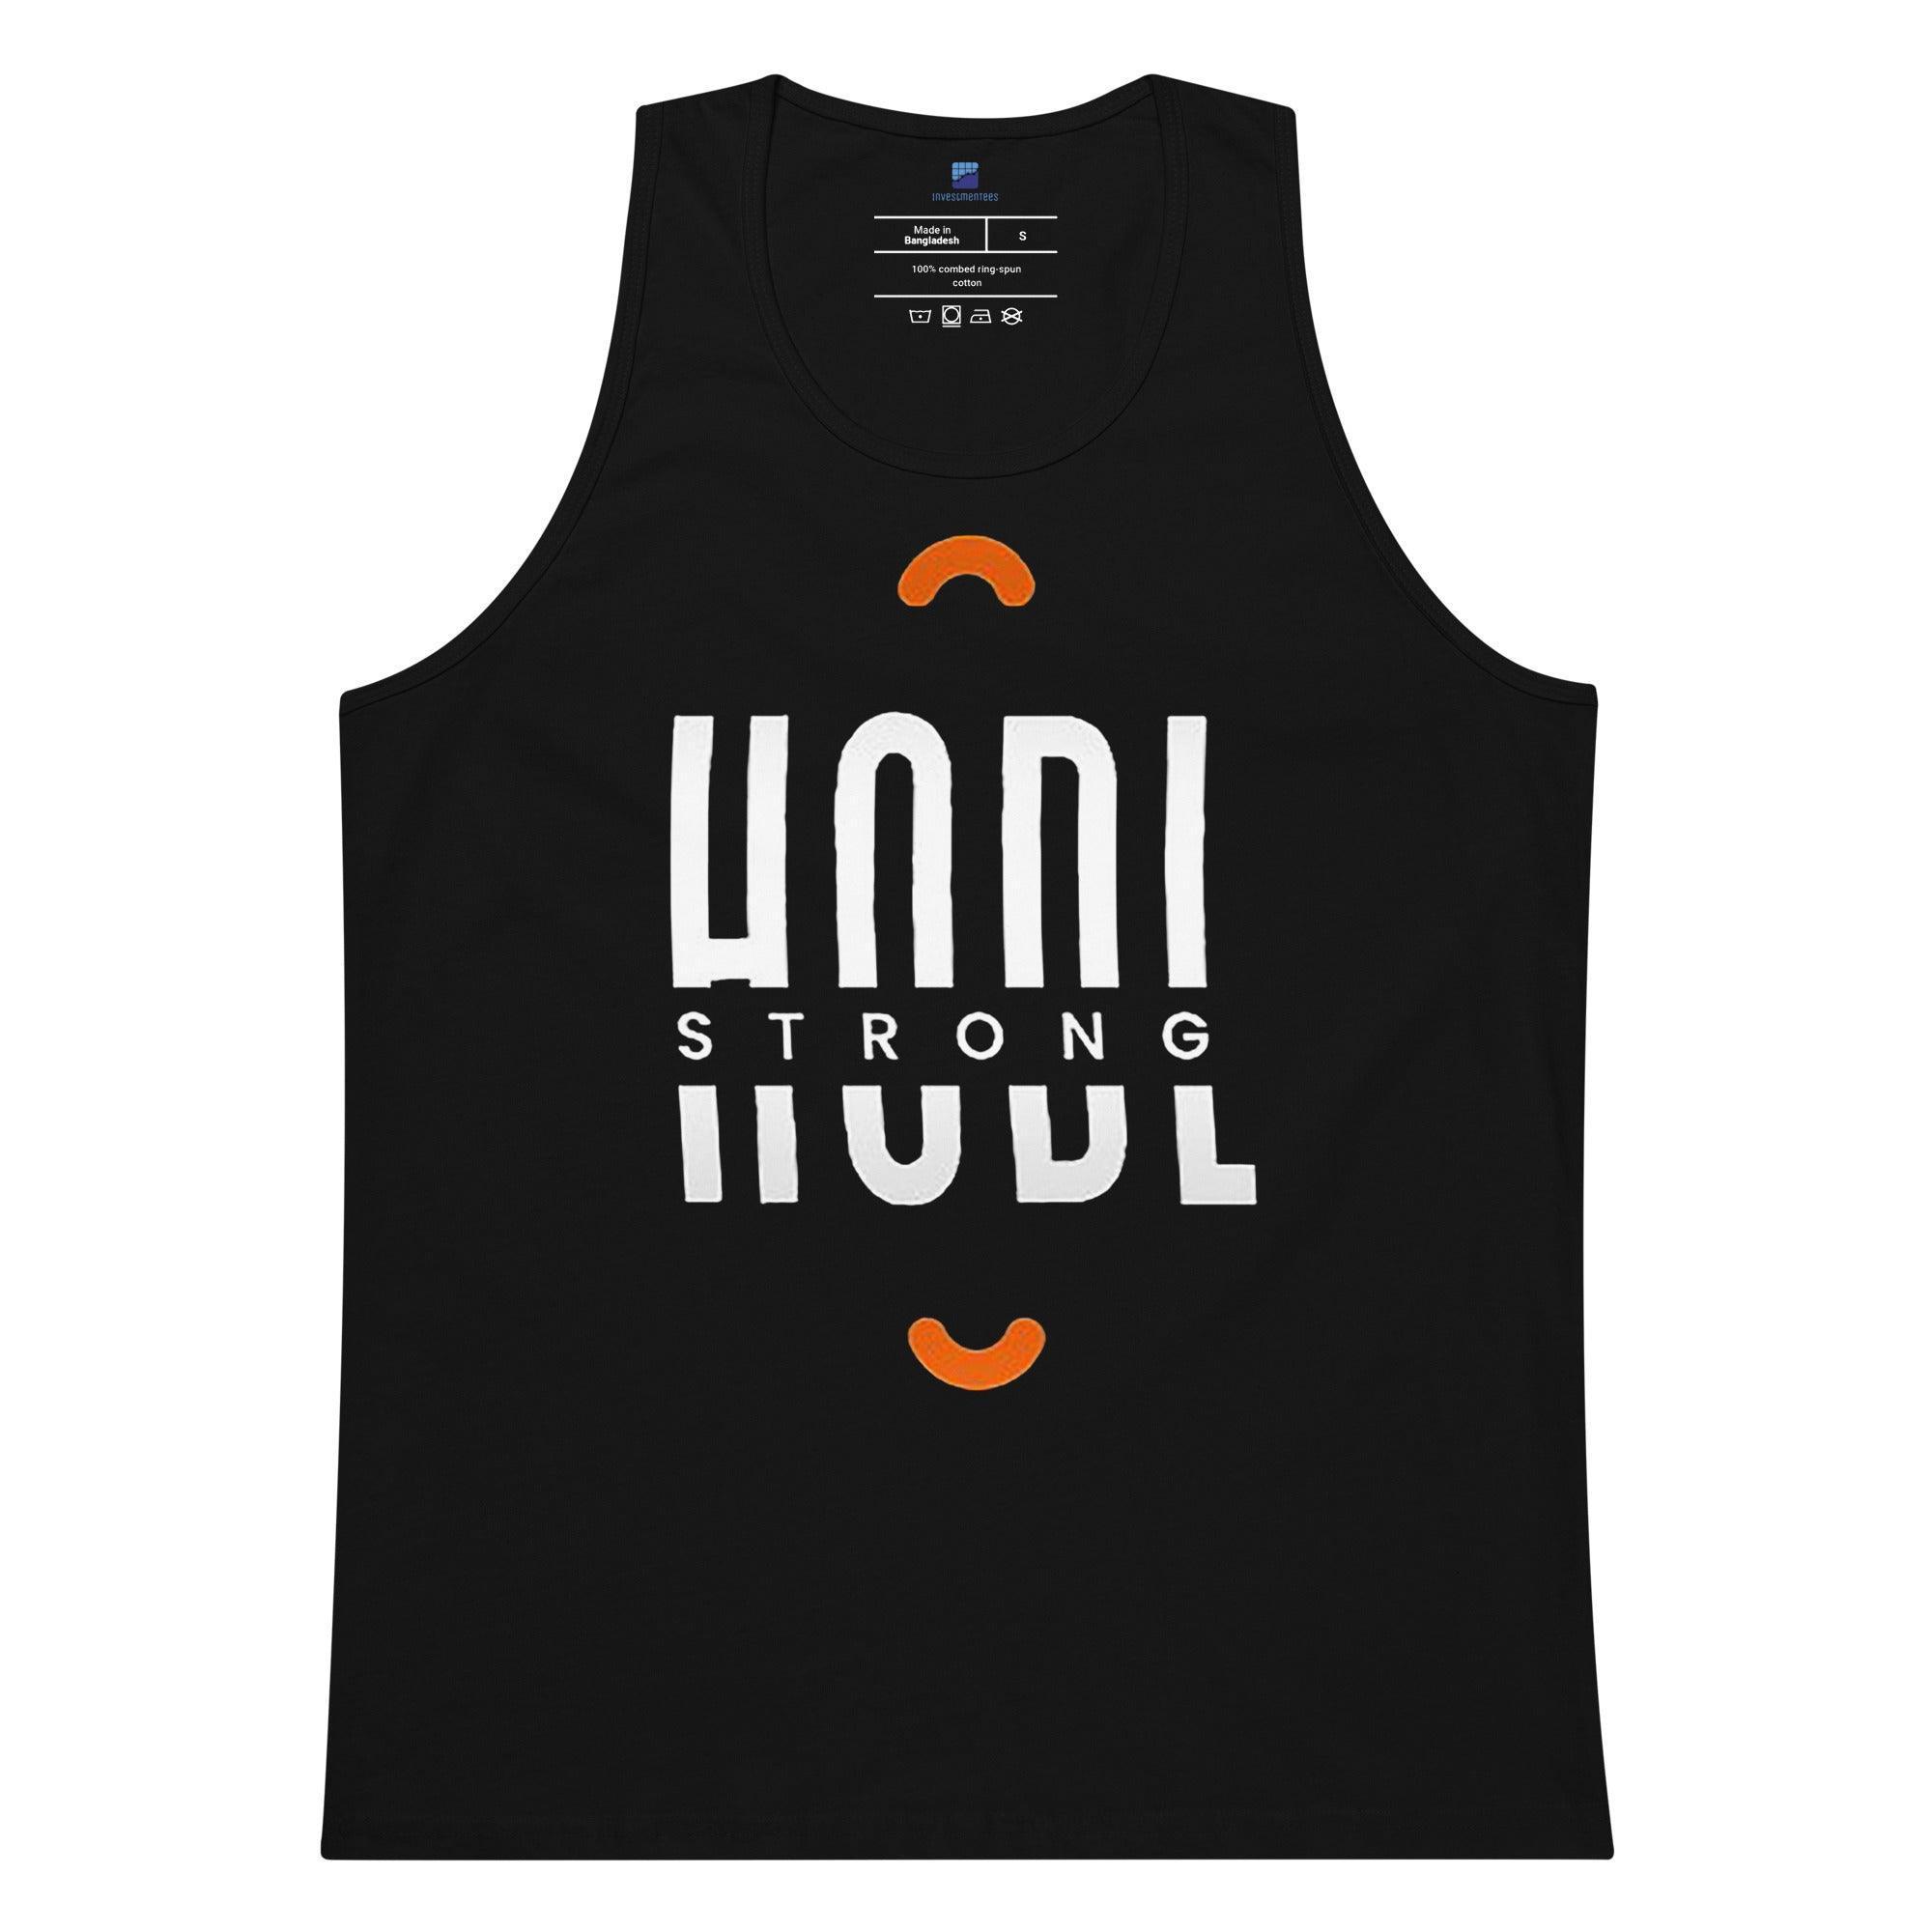 HODL Strong Tank Top - InvestmenTees